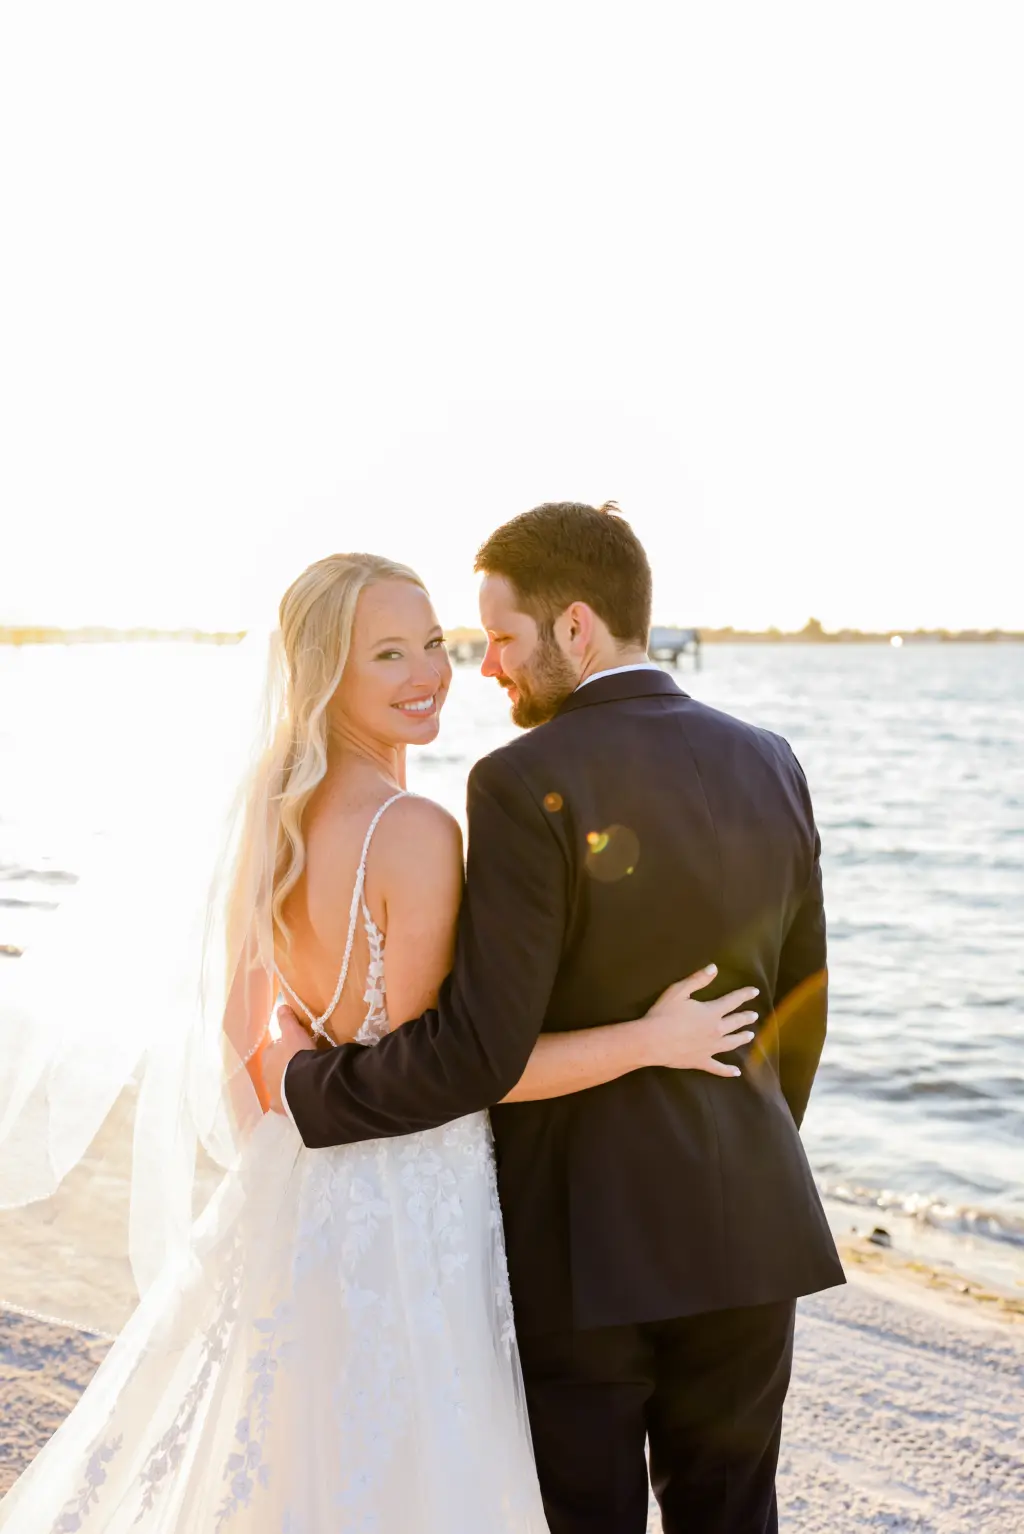 Bride and Groom Just Married Sunset Beach Wedding Portrait | St Pete Beach Photographer Lifelong Photography | Videographer Shannon Kelly Films | Planner Coastal Coordinating | Venue Isla del Sol Yacht Club